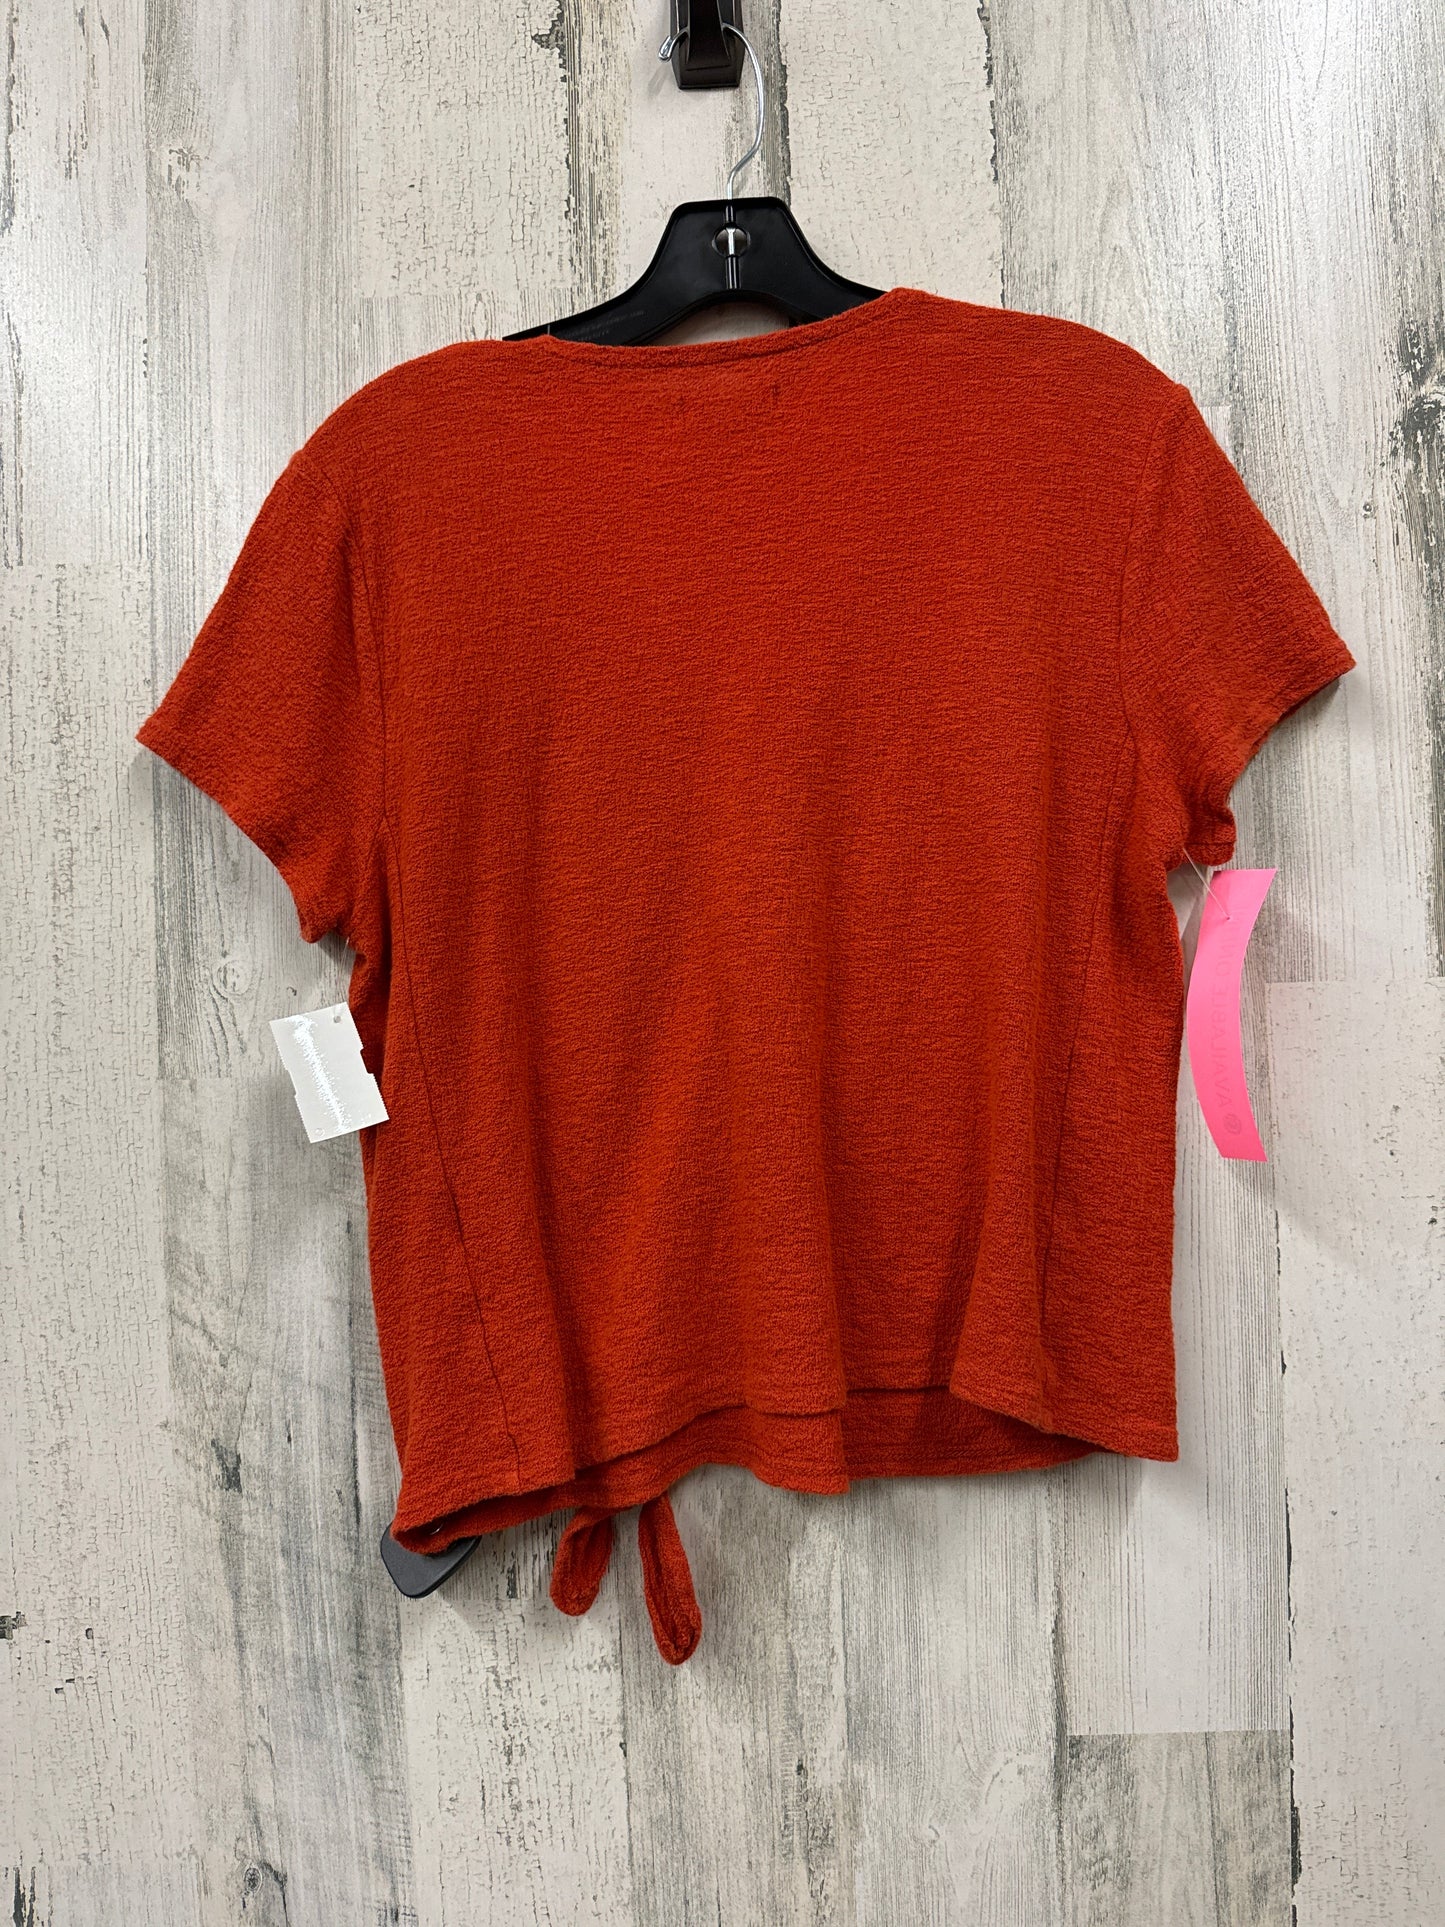 Red Top Short Sleeve Basic Madewell, Size M